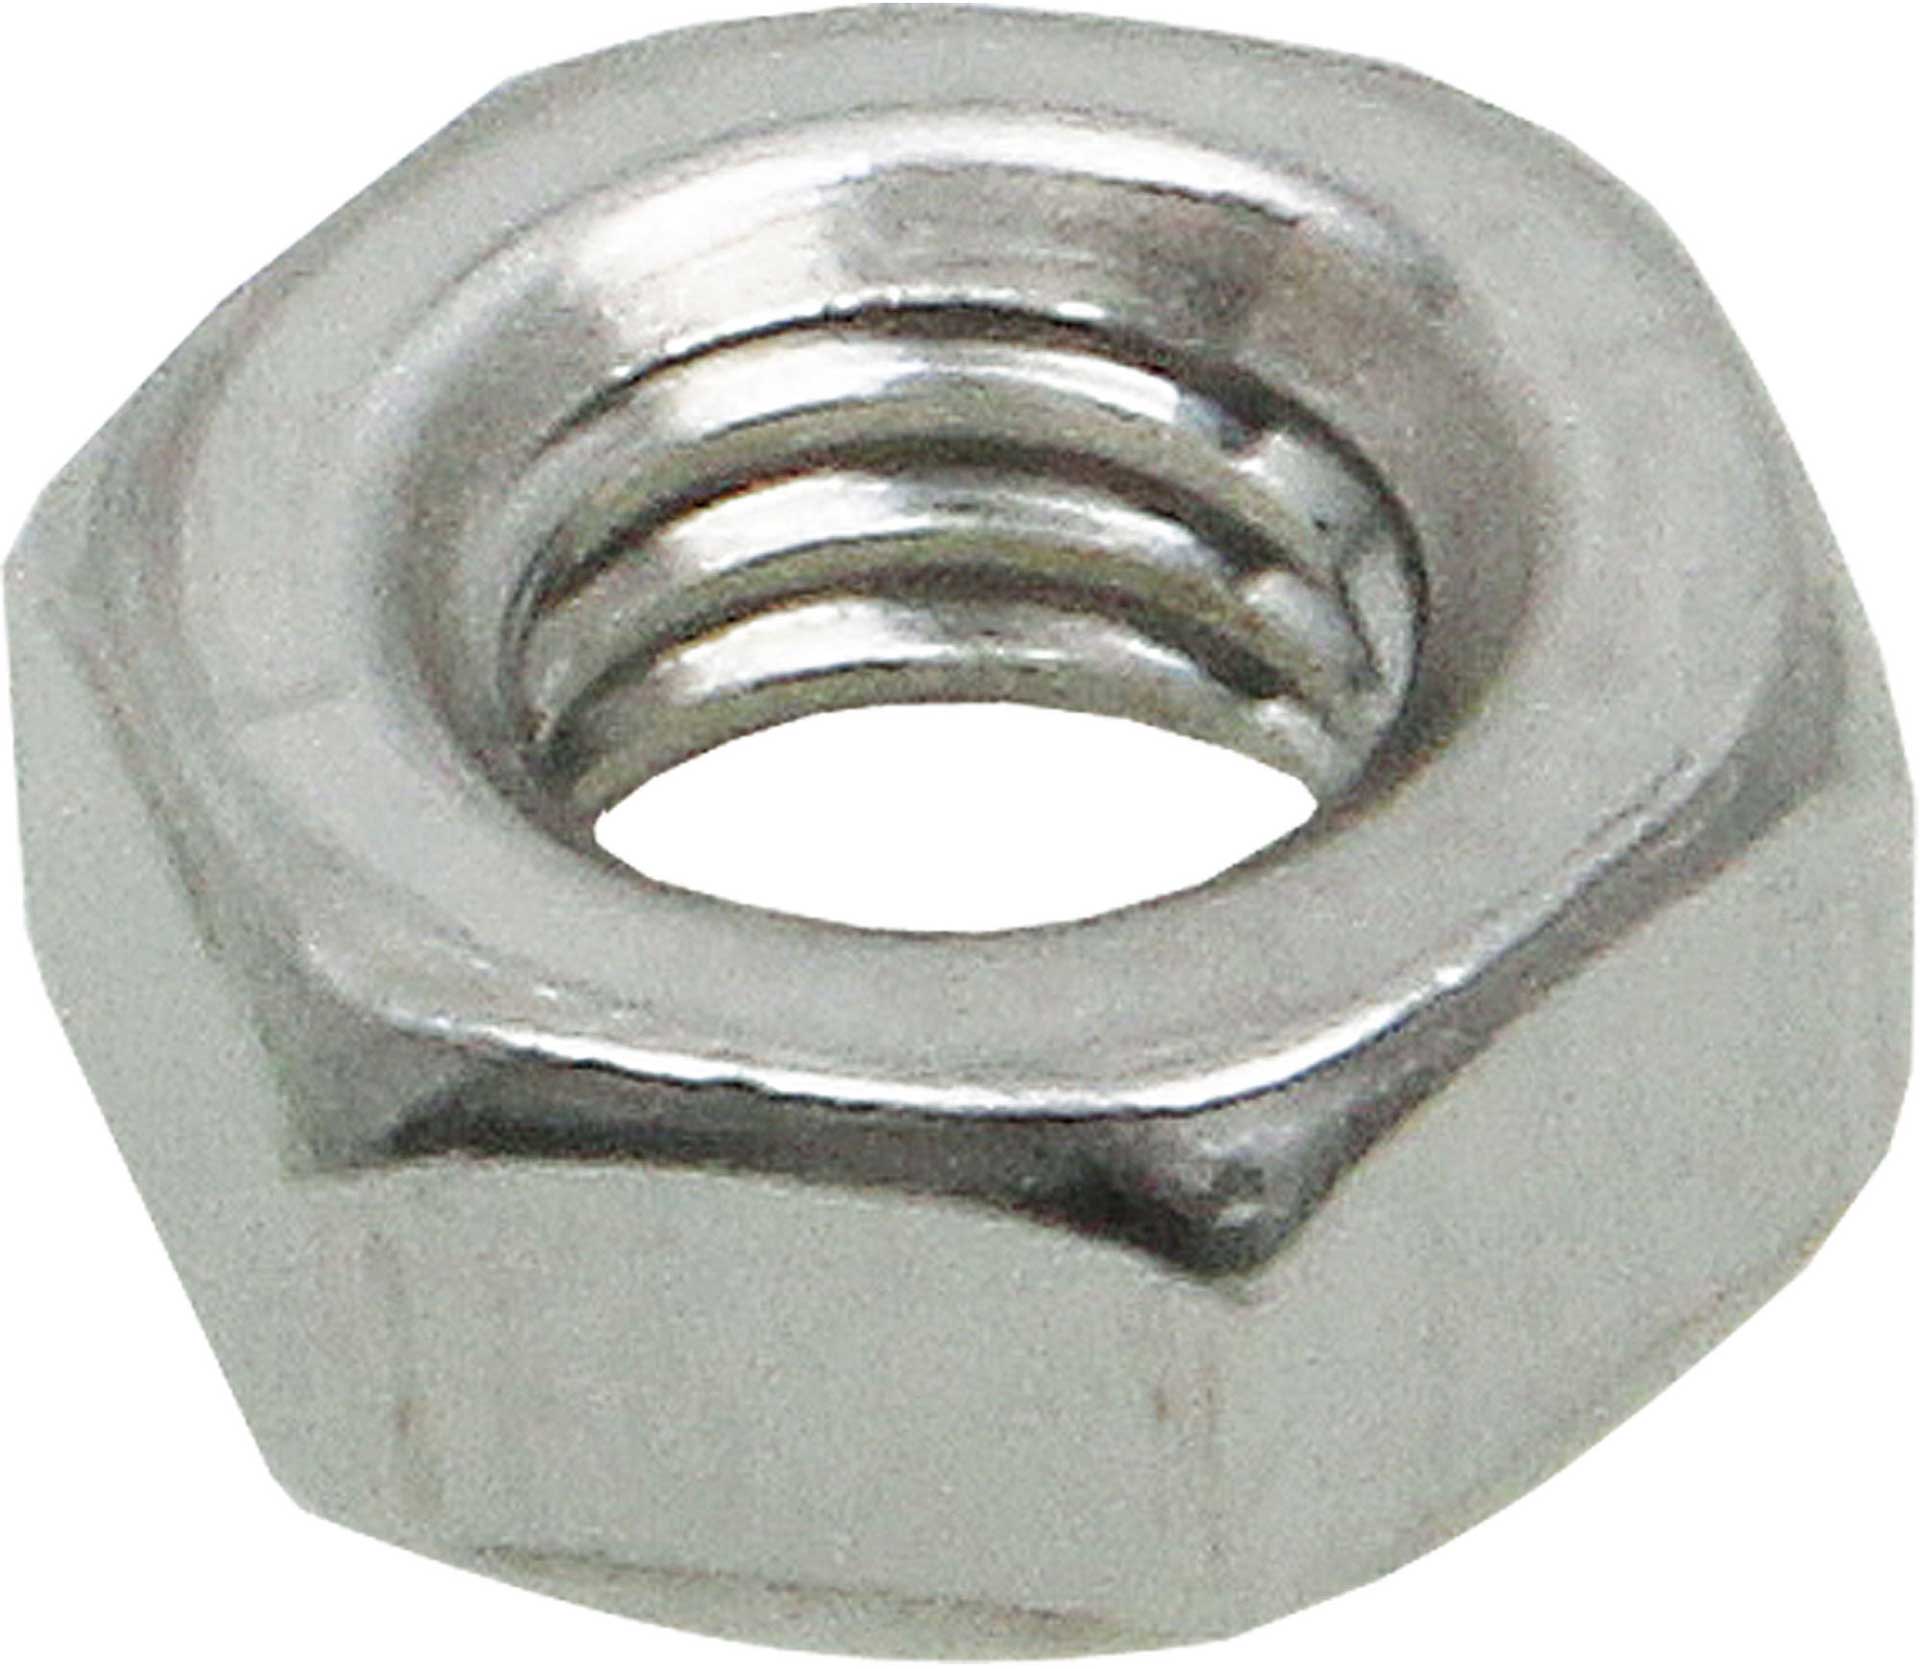 Modellbau Lindinger STAINLESS STEEL NUTS M3 10PCS.